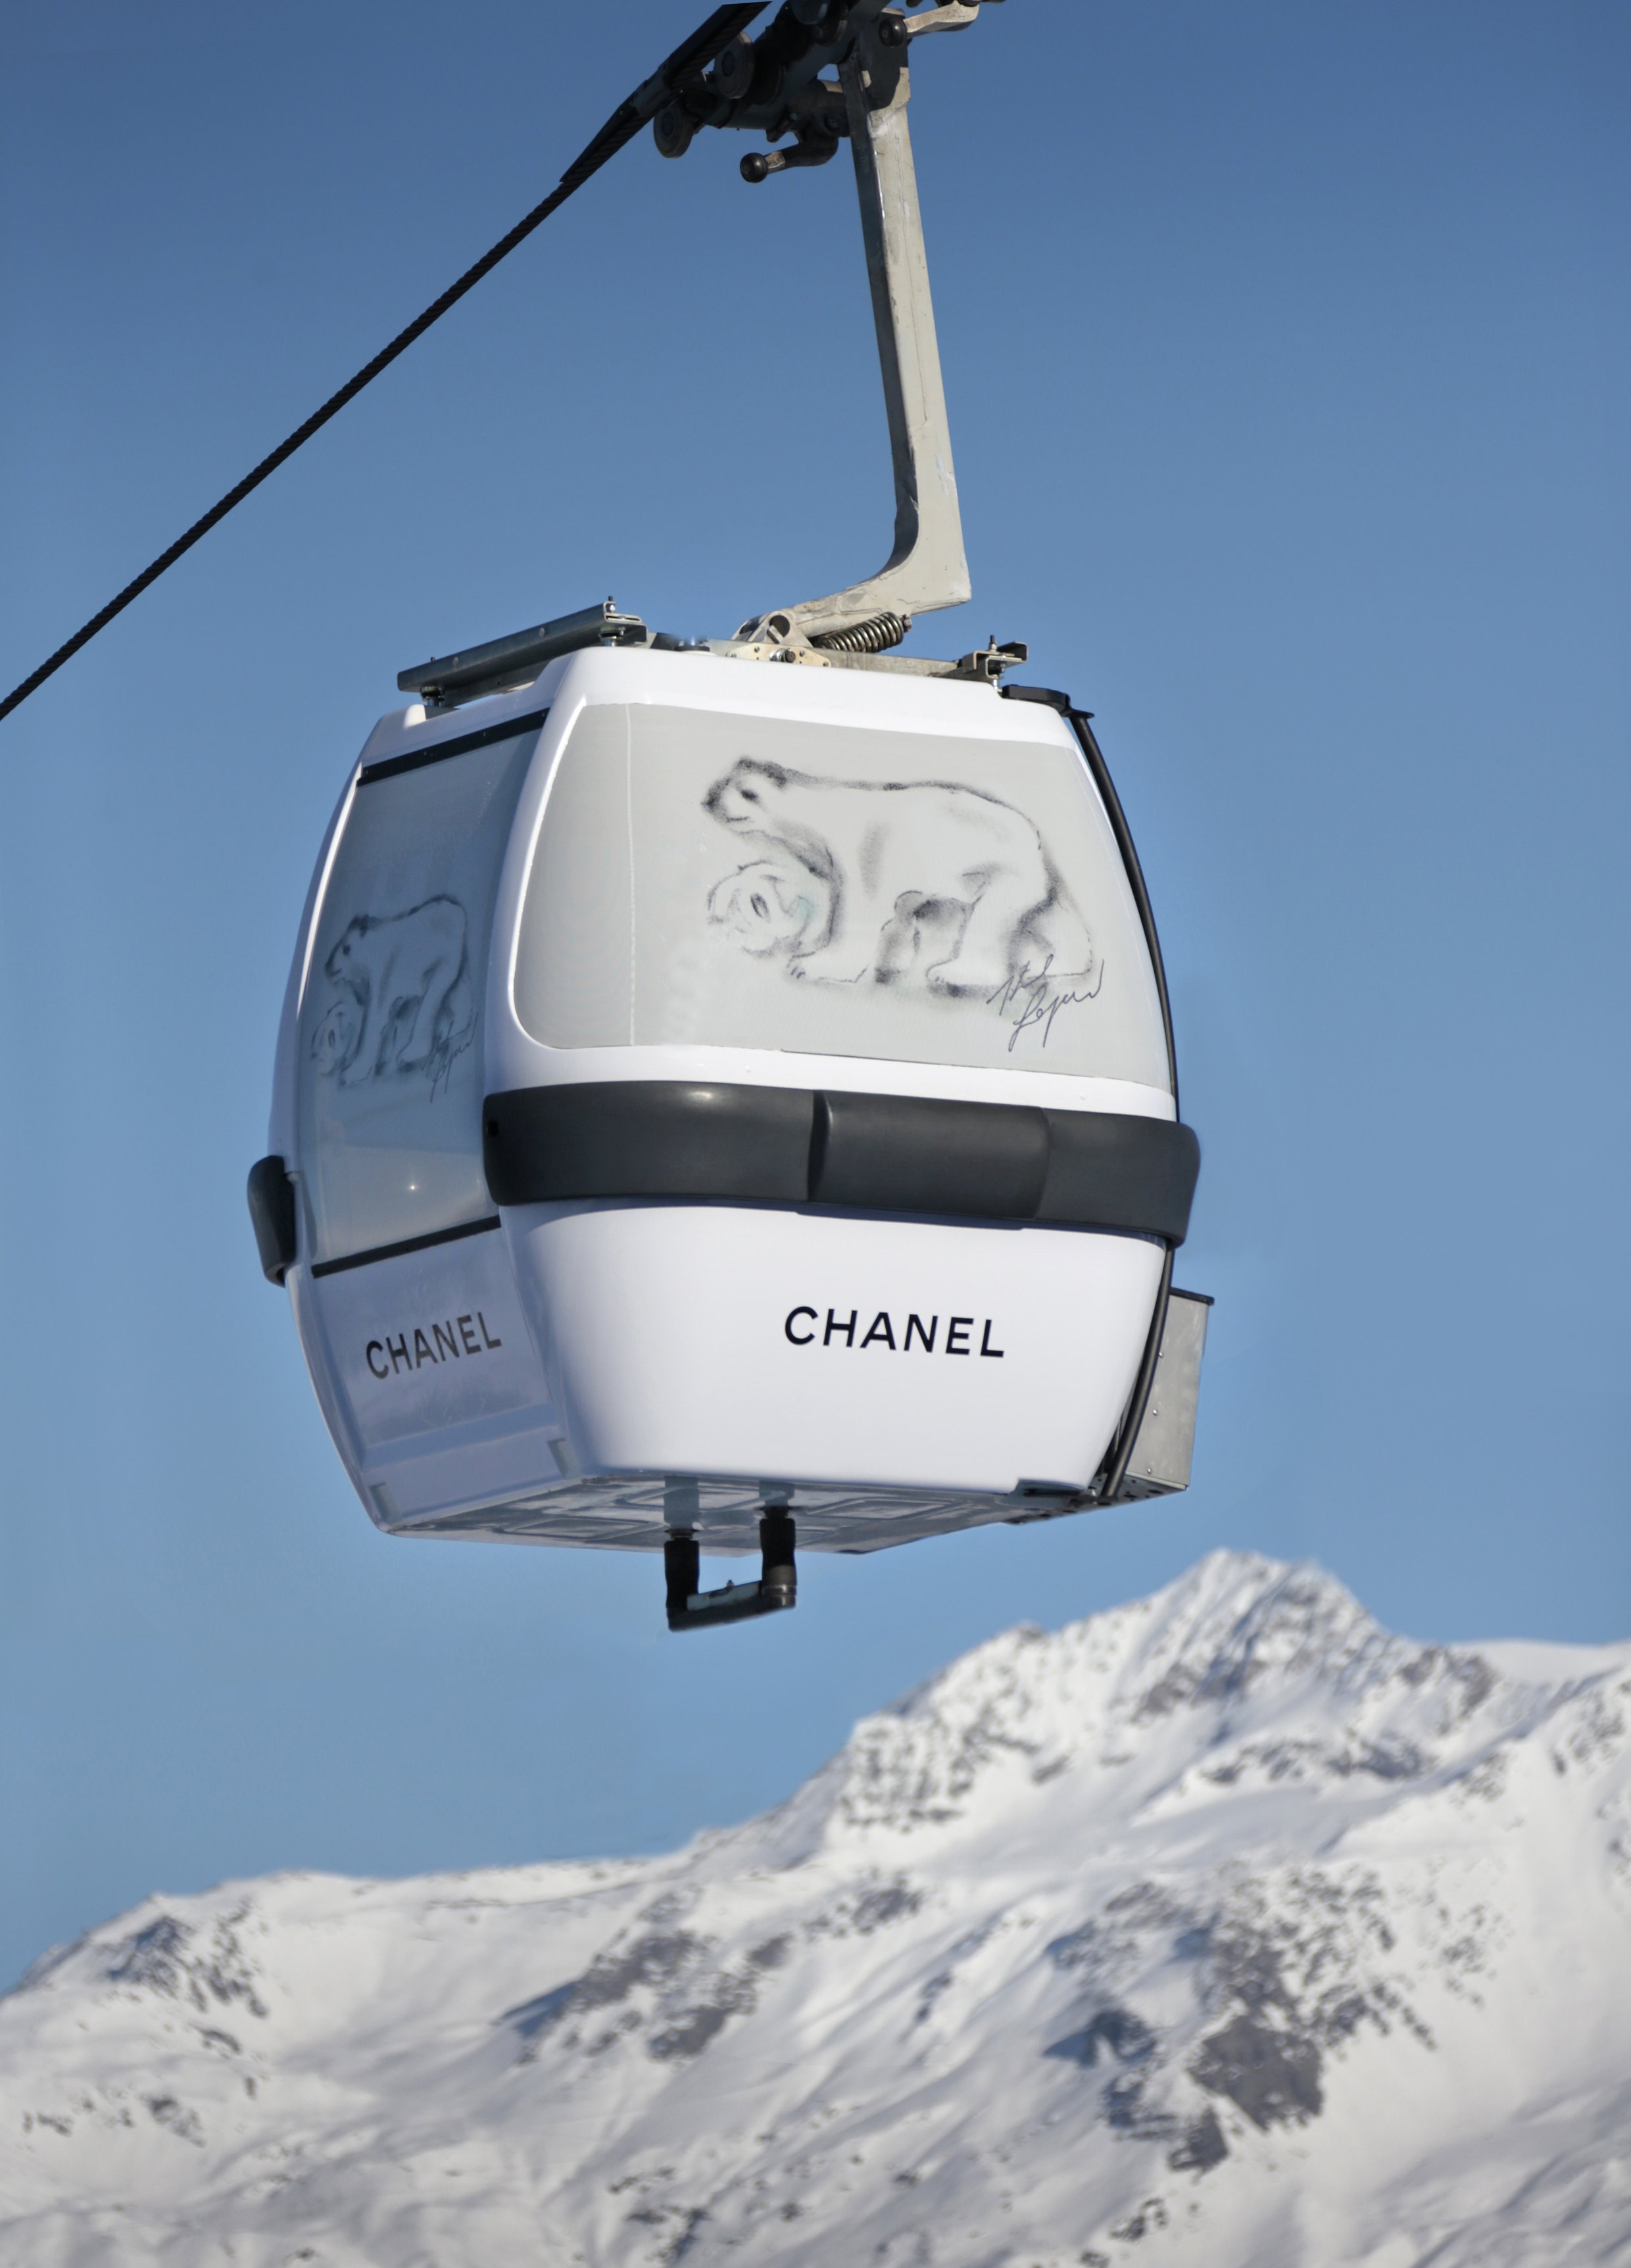 CHANEL IN COURCHEVEL